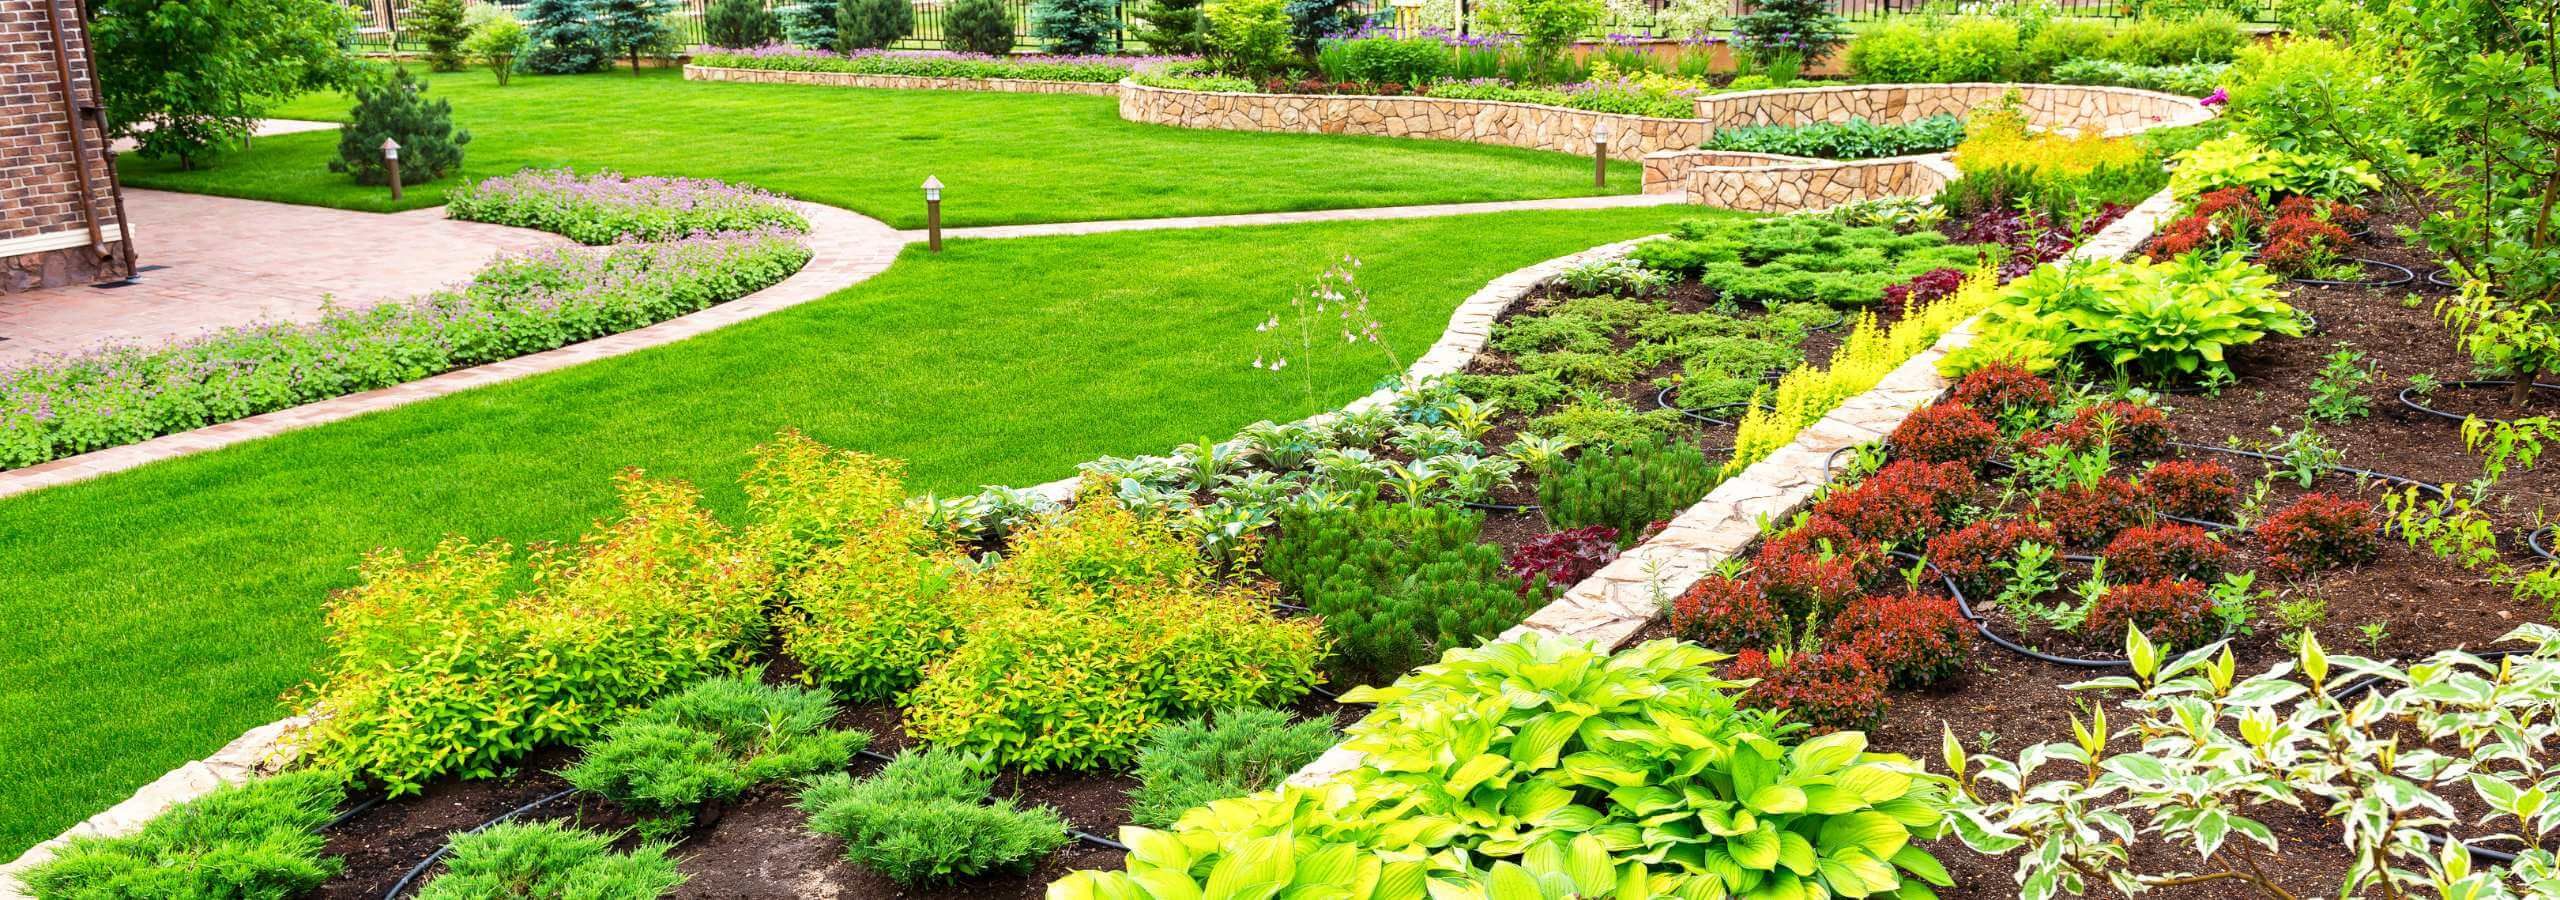 Lawn and Garden image FAQs